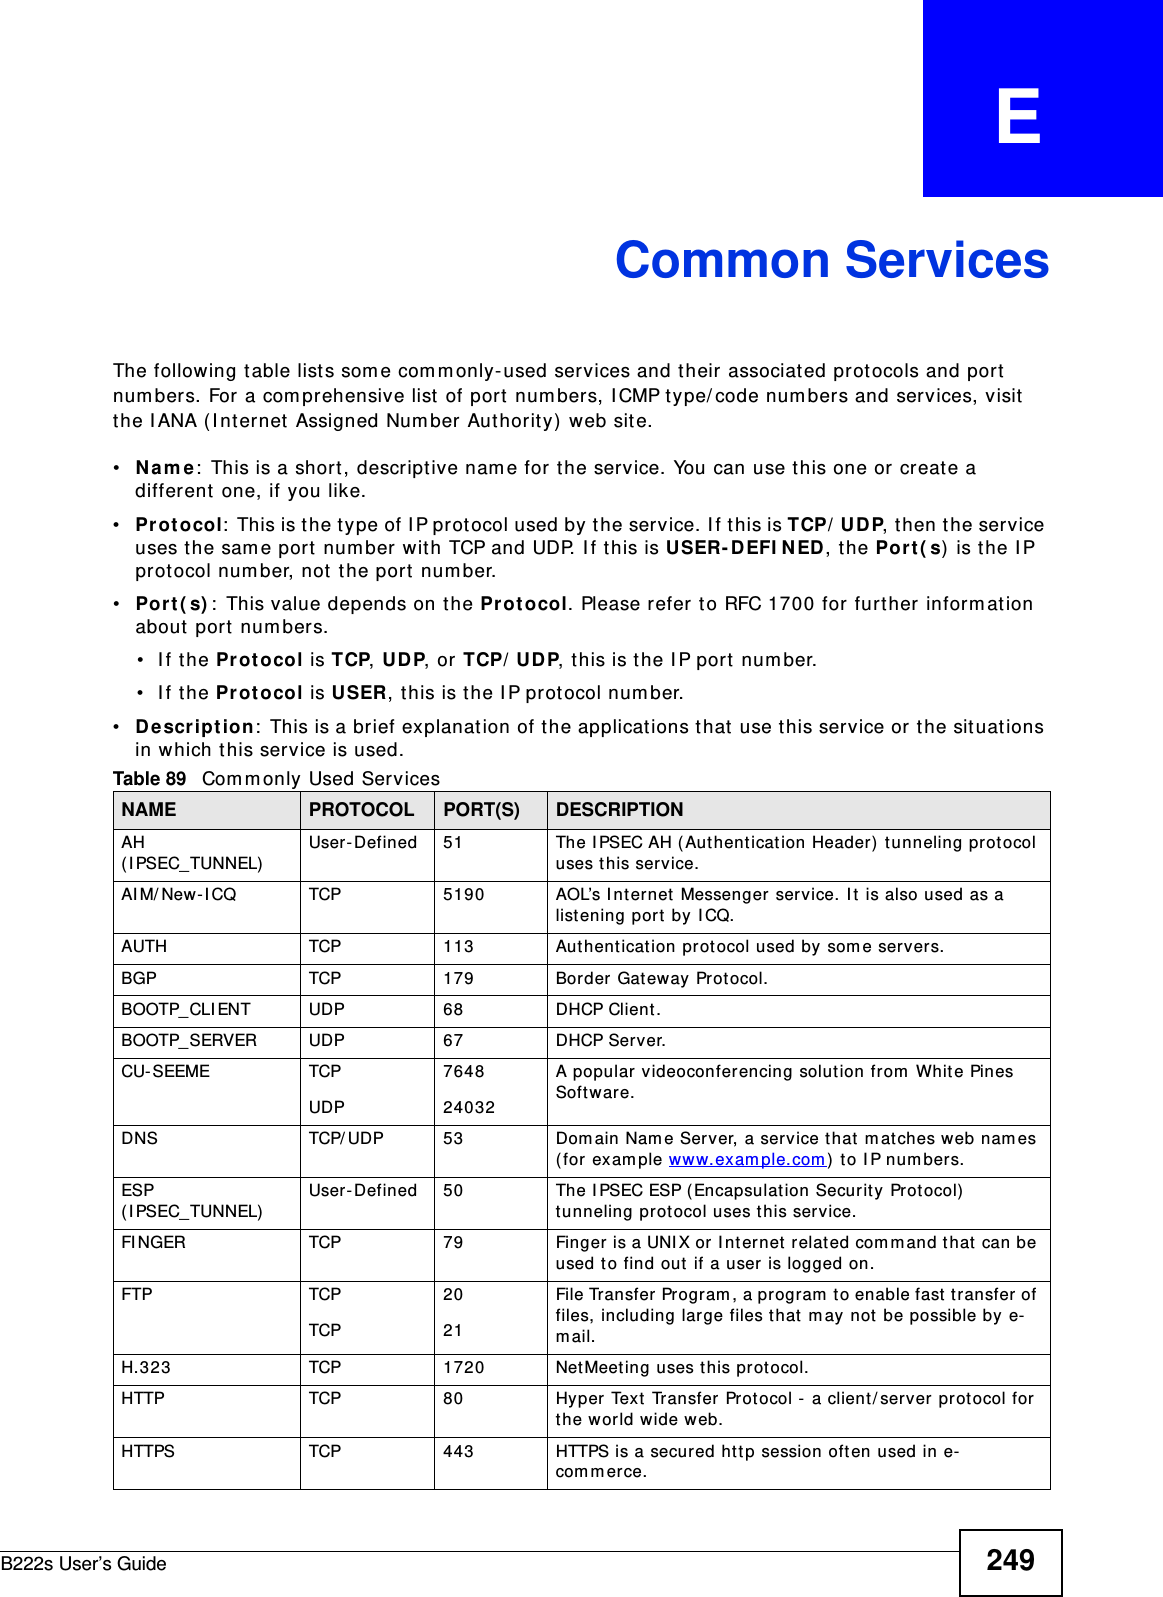 B222s User’s Guide 249APPENDIX   ECommon ServicesThe following t able list s som e com m only-used services and t heir associat ed prot ocols and port  num bers. For a com prehensive list of port  num bers, I CMP type/ code num bers and services, visit  the I ANA ( I nt ernet  Assigned Num ber Aut horit y)  web sit e. •N a m e :  This is a short , descript ive nam e for t he service. You can use t his one or creat e a different  one, if you like.•Pr ot ocol:  Th is is t h e t y p e of  I P p r ot ocol u sed  b y  t h e ser v ice.  I f t h is is TCP/ UDP, t hen t he service uses t he sam e port num ber wit h TCP and UDP. I f this is U SER- D EFI N ED, the Po rt ( s)  is the I P prot ocol num ber, not  t he port num ber.•Po rt ( s) :  This value depends on t he Pr ot ocol. Please refer t o RFC 1700 for furt her inform ation about port  num bers.• If the Pr ot ocol is TCP, UD P, or TCP/ UDP, this is the I P port num ber.• If the Pr ot ocol is USER, t his is t he I P prot ocol num ber.•D e scr ip t ion :  This is a brief explanat ion of the applicat ions that  use t his service or the situat ions in which t his service is used.Table 89   Com m only Used Ser vicesNAME PROTOCOL PORT(S) DESCRIPTIONAH ( I PSEC_ TUNNEL)User - Defined 51 The I PSEC AH ( Aut henticat ion Header)  t unneling prot ocol uses this service.AI M/ New- I CQ TCP 5190 AOL’s I nt ernet  Messenger service. I t is also used as a list ening por t by I CQ.AUTH TCP 113 Aut hent ication prot ocol used by som e ser vers.BGP TCP 179 Bor der Gateway Prot ocol.BOOTP_CLI ENT UDP 68 DHCP Client .BOOTP_SERVER UDP 67 DHCP Server.CU-SEEME TCPUDP764824032A popular videoconferencing solut ion from  White Pines Soft ware.DNS TCP/ UDP 53 Dom ain Nam e Server, a serv ice t hat m at ches web nam es ( for exam ple www. exam ple.com )  to I P num bers.ESP ( I PSEC_ TUNNEL)User - Defined 50 The I PSEC ESP (Encapsulat ion Securit y Prot ocol) tunneling protocol uses this ser vice.FI NGER TCP 79 Fin ger is a UNI X or  I nt er net  related com m and t hat can be used to find out if a user is logged on.FTP TCPTCP2021File Transfer Program , a program  to enable fast  t ransfer of files, including large files t hat  m ay not be possible by e-m ail.H.323 TCP 1720 NetMeet ing uses t his pr otocol.HTTP TCP 80 Hyper Text  Transfer Prot ocol -  a client / server pr otocol for the world wide web.HTTPS TCP 443 HTTPS is a secur ed htt p session oft en used in e-com m erce.